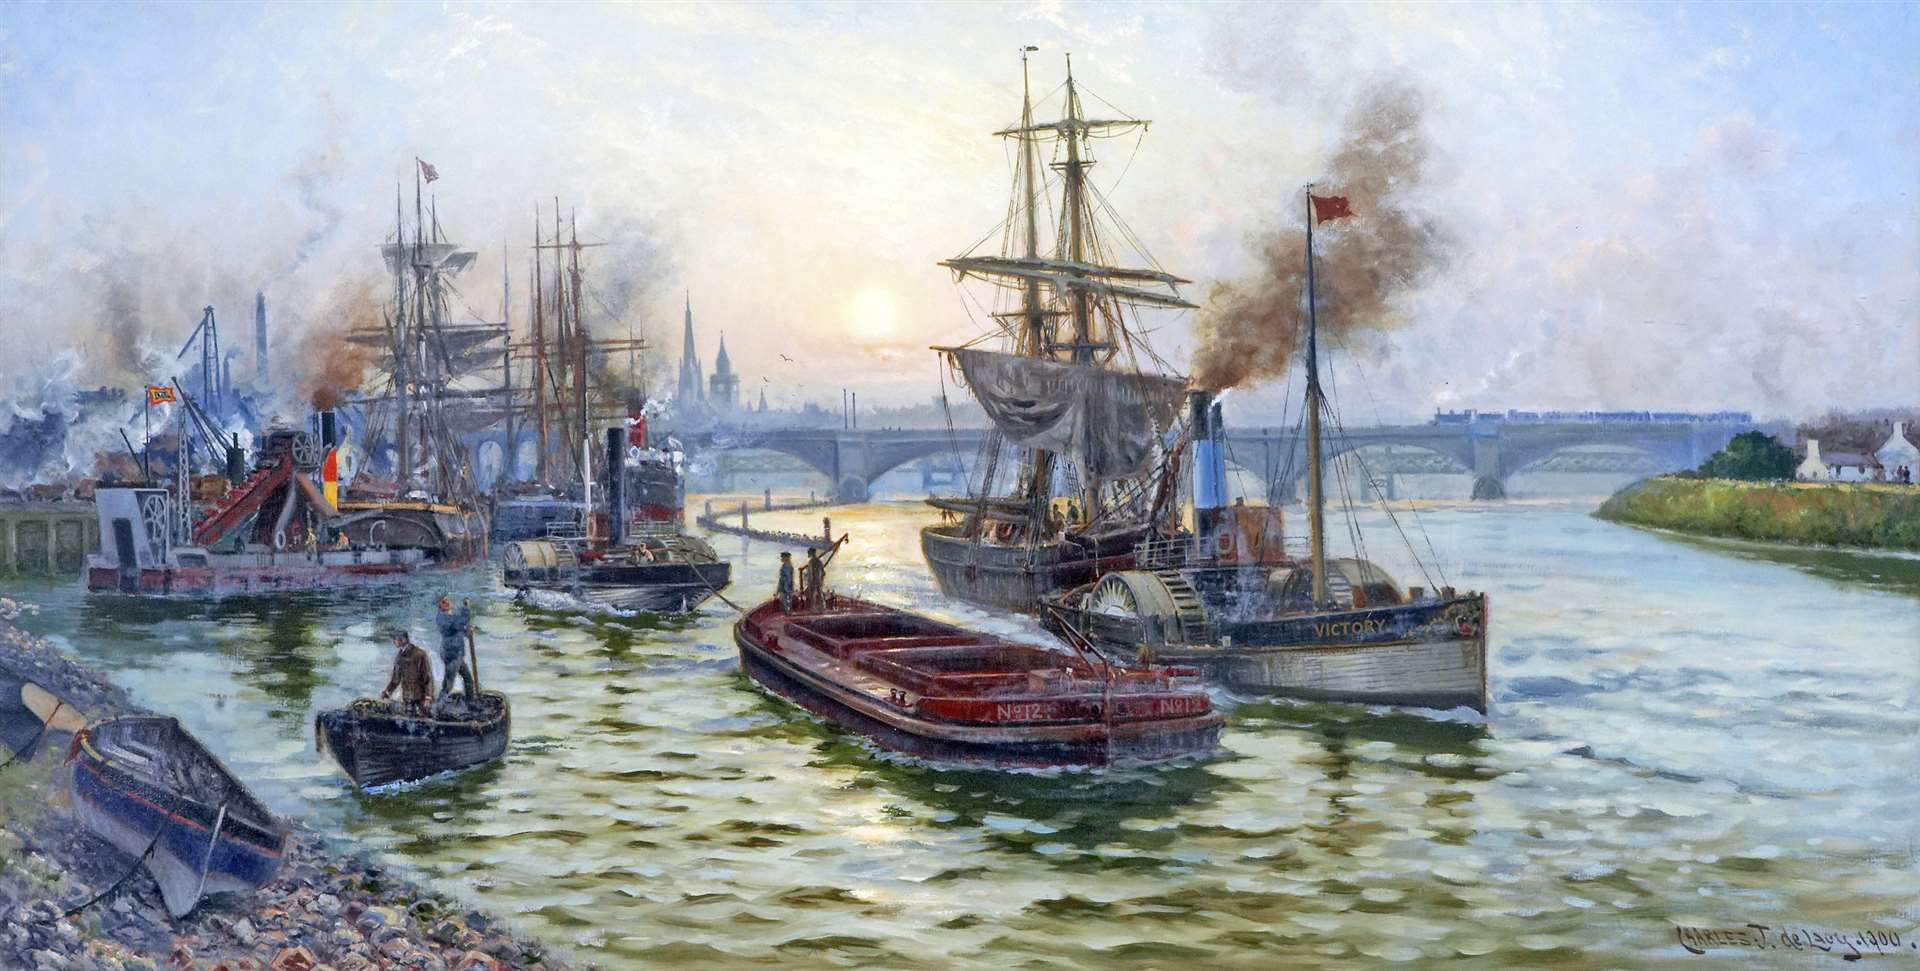 Painting by Charles John de Lacy presented to the Inverness Harbour Trustees in 1901 by the London and Tilbury Contracting Company on the completion of the major dredging operation carried out in 1900. Credit: Am Baile Highland Highland.